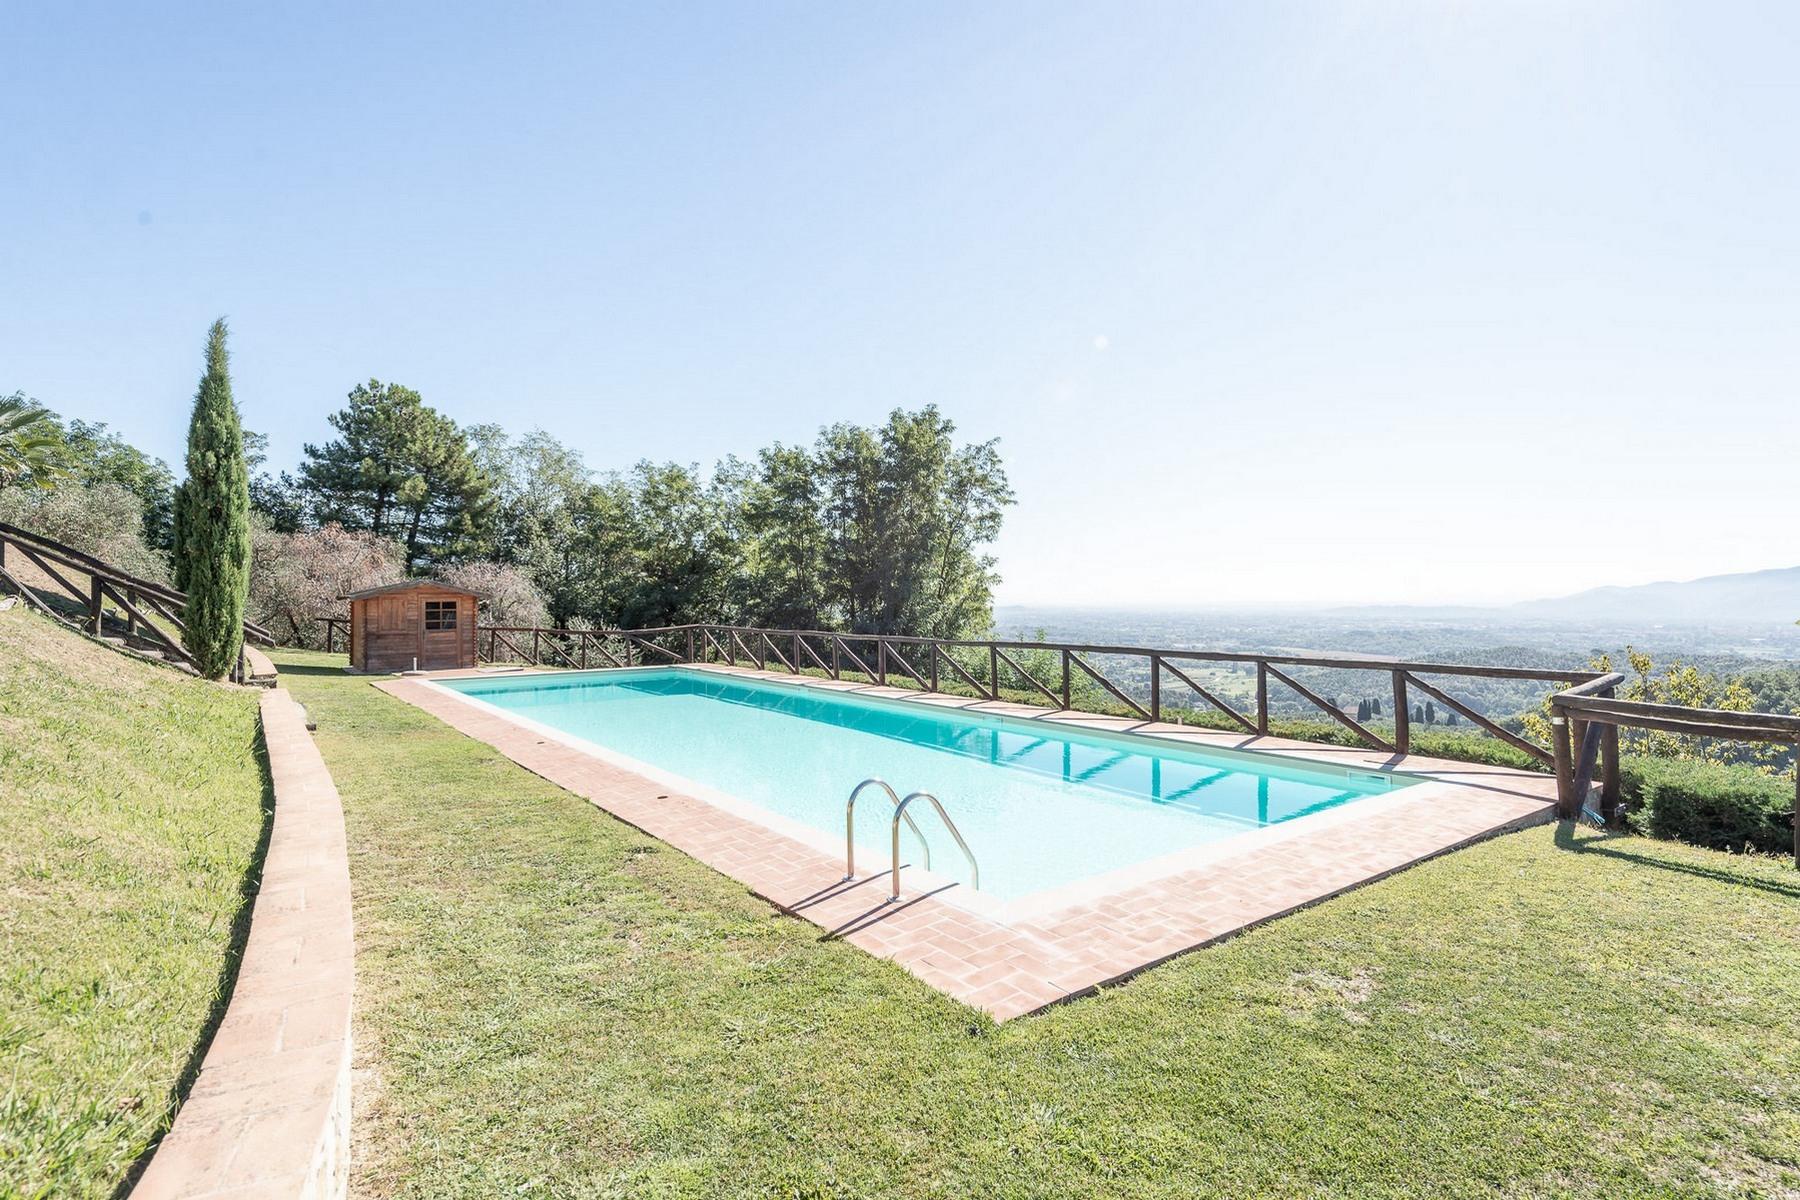 Superb villa with pool on the hills of Lucca - 4